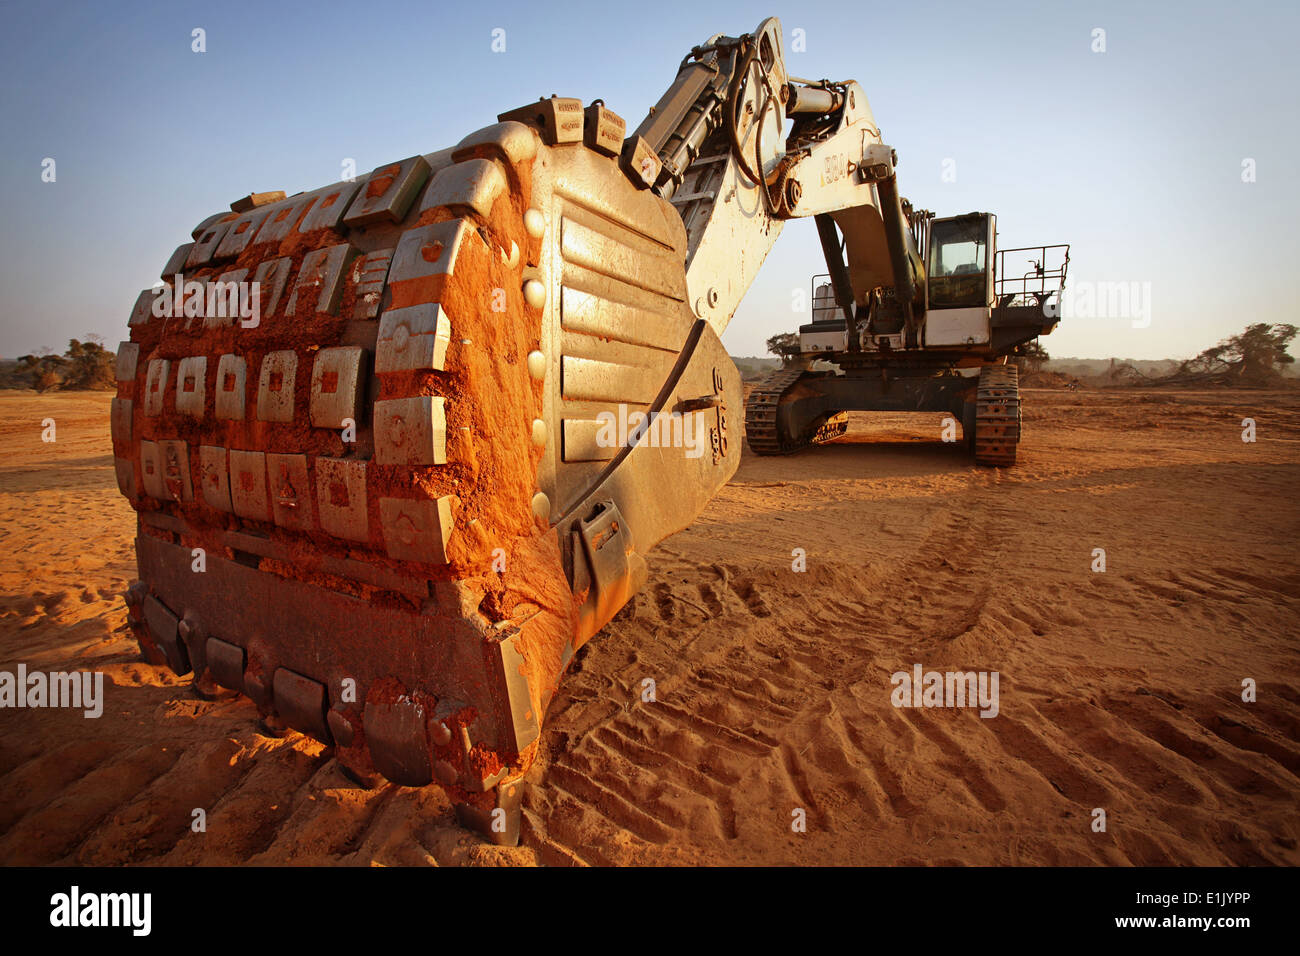 984 Digger excavator at sunset on a copper mine in Zambia Stock Photo